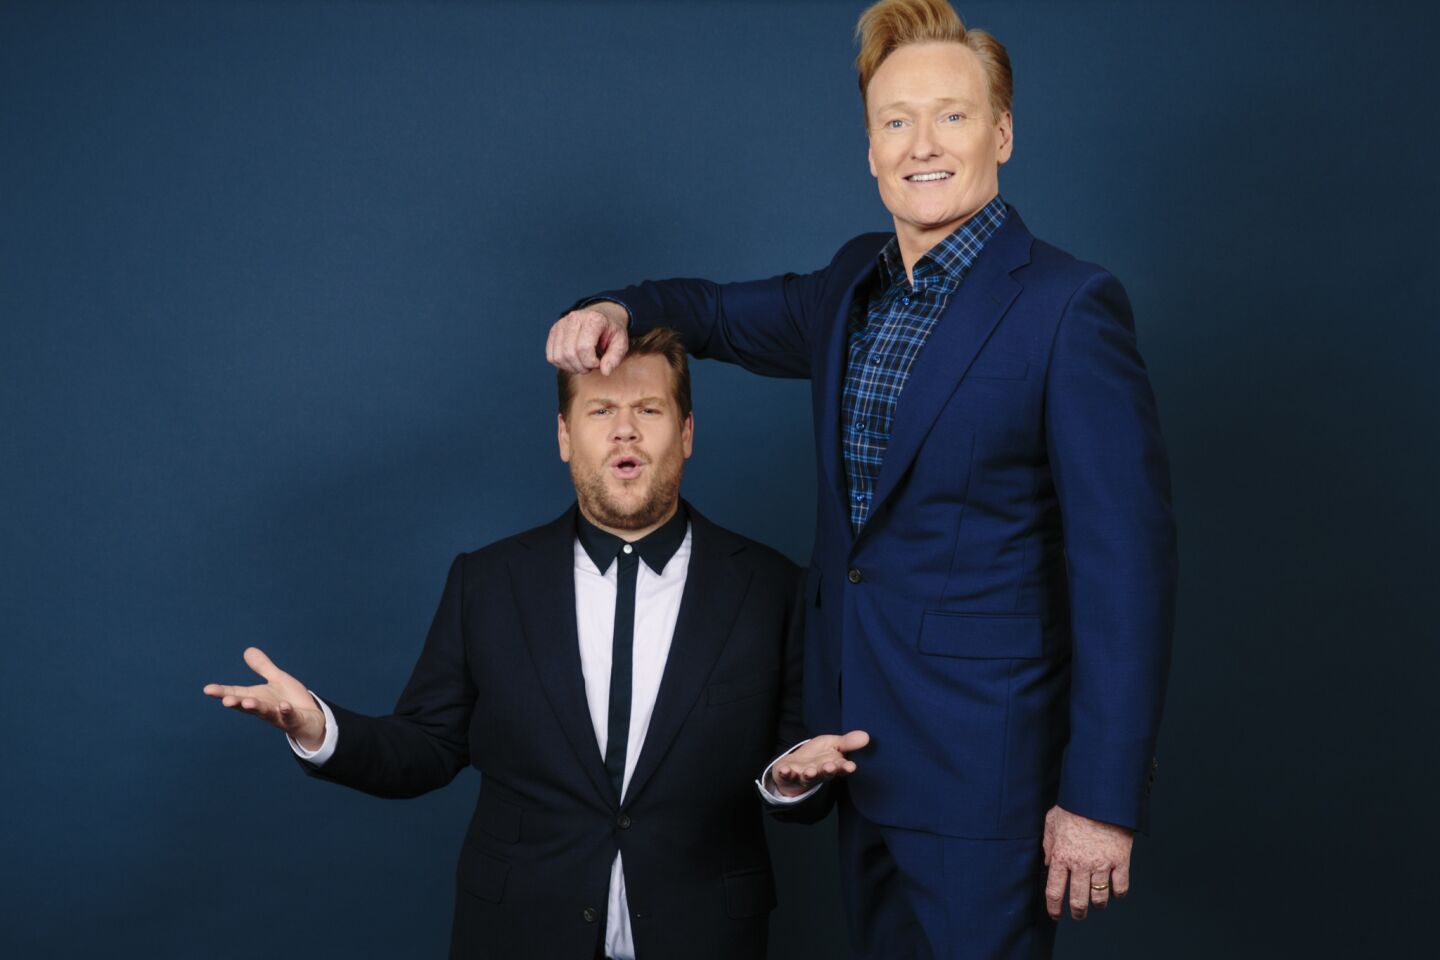 Celebrity portraits by The Times | Conan O'Brien and James Corden